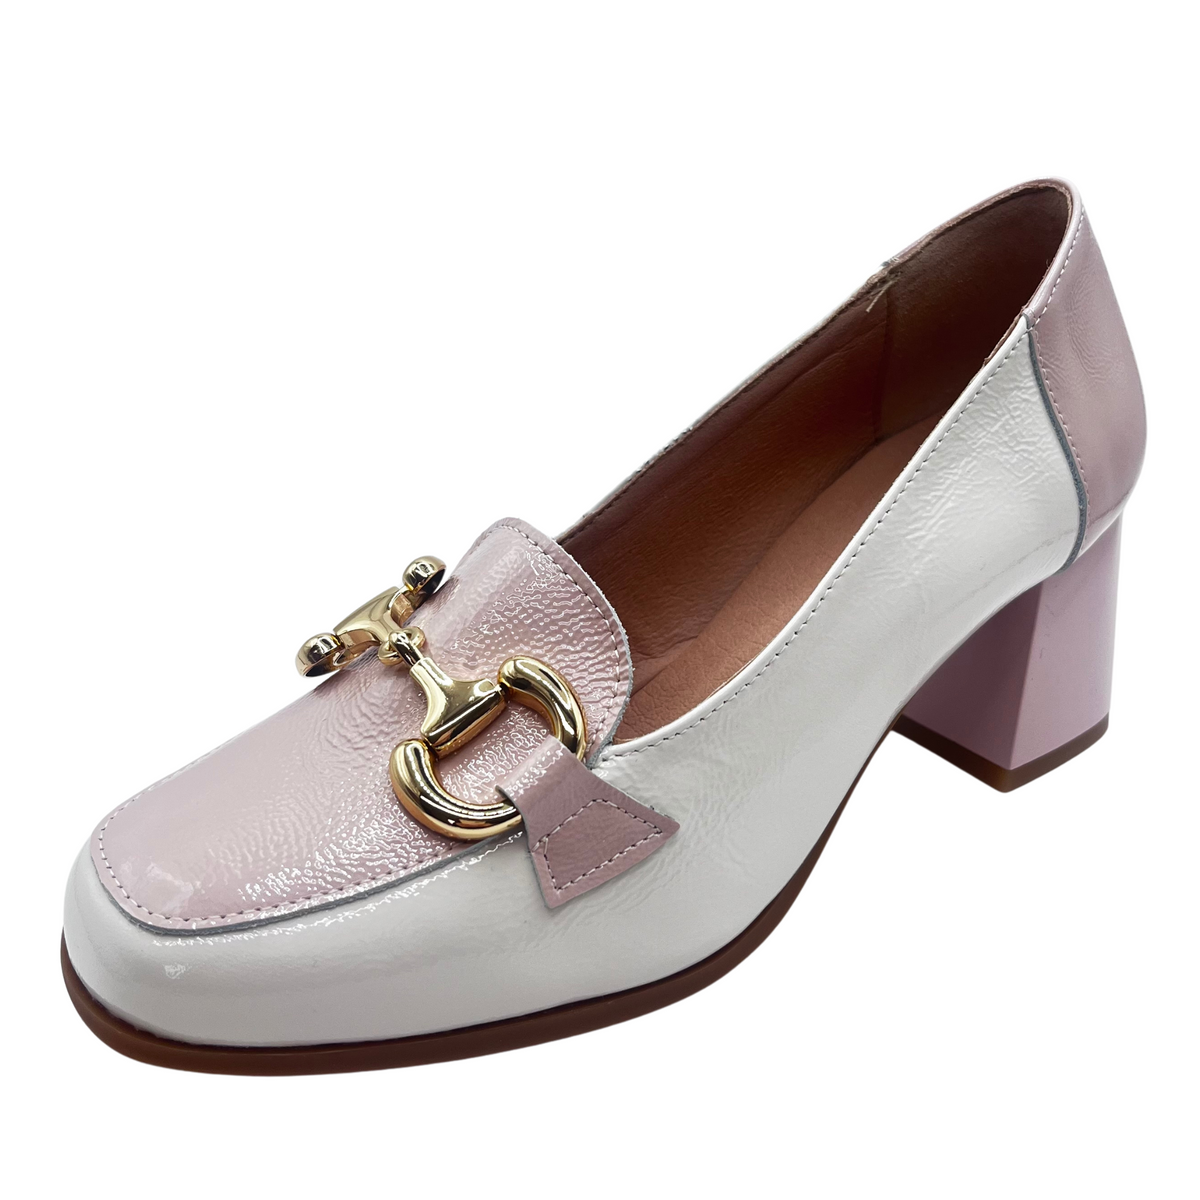 Pitillos Pink and Cream Block Heel Patent Loafer